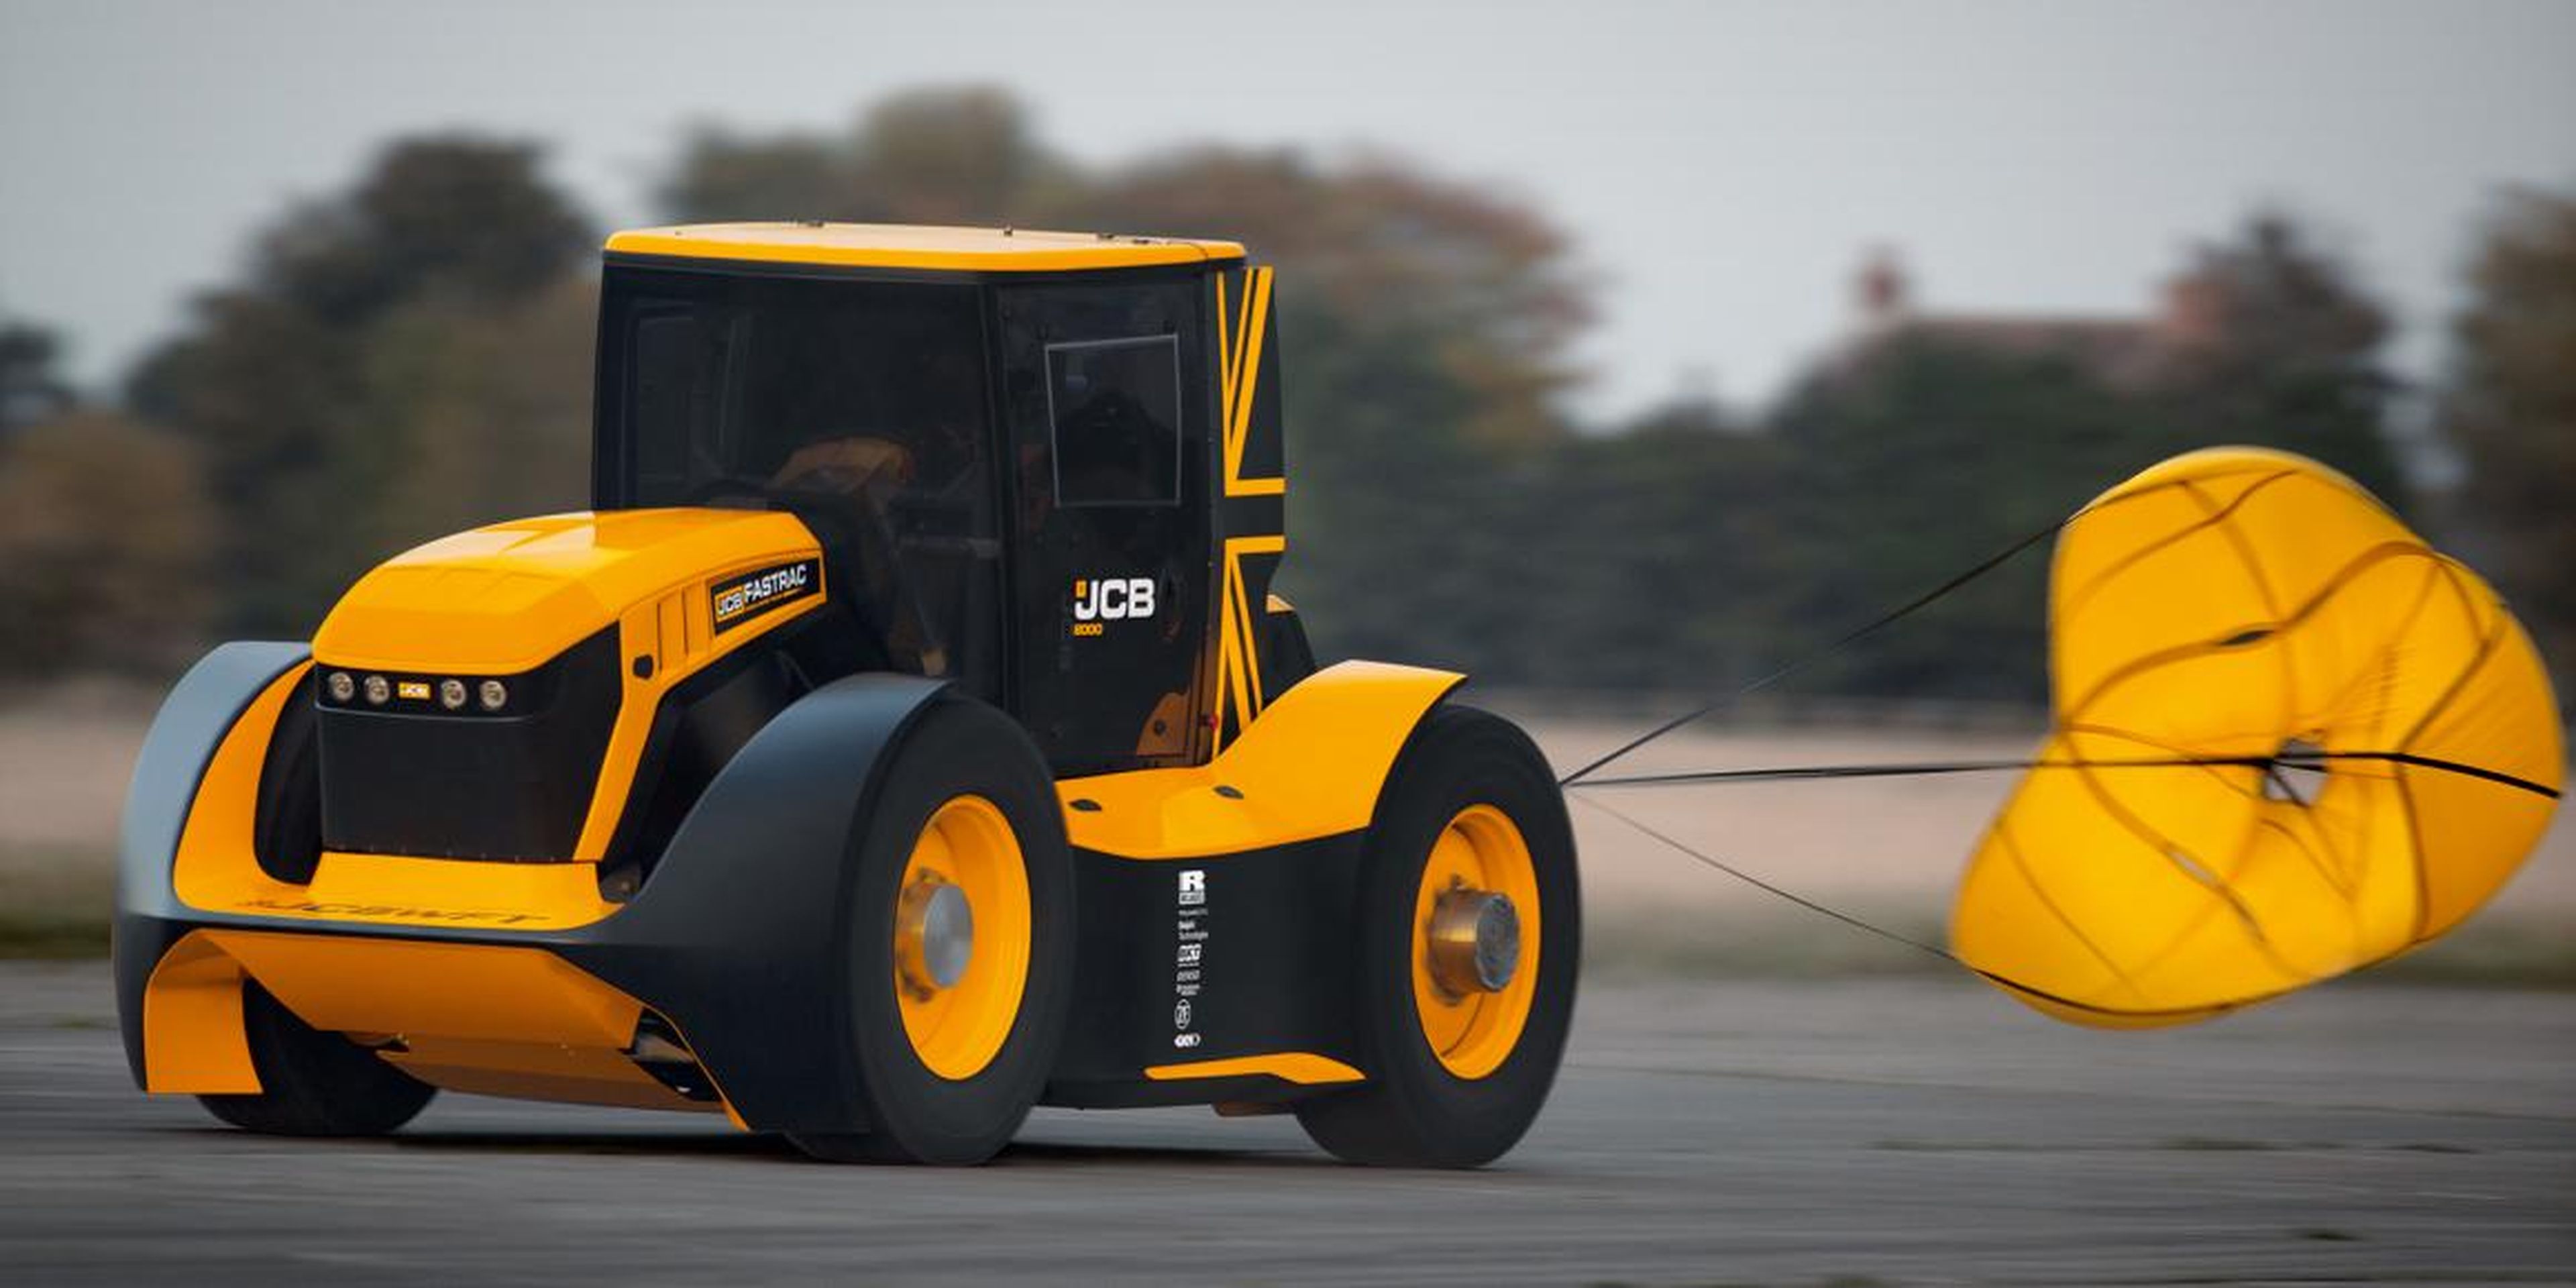 "The biggest challenges have included aerodynamics, reducing weight and improving performance," Tim Burnhope, head of innovation at JCB, said in a statement.